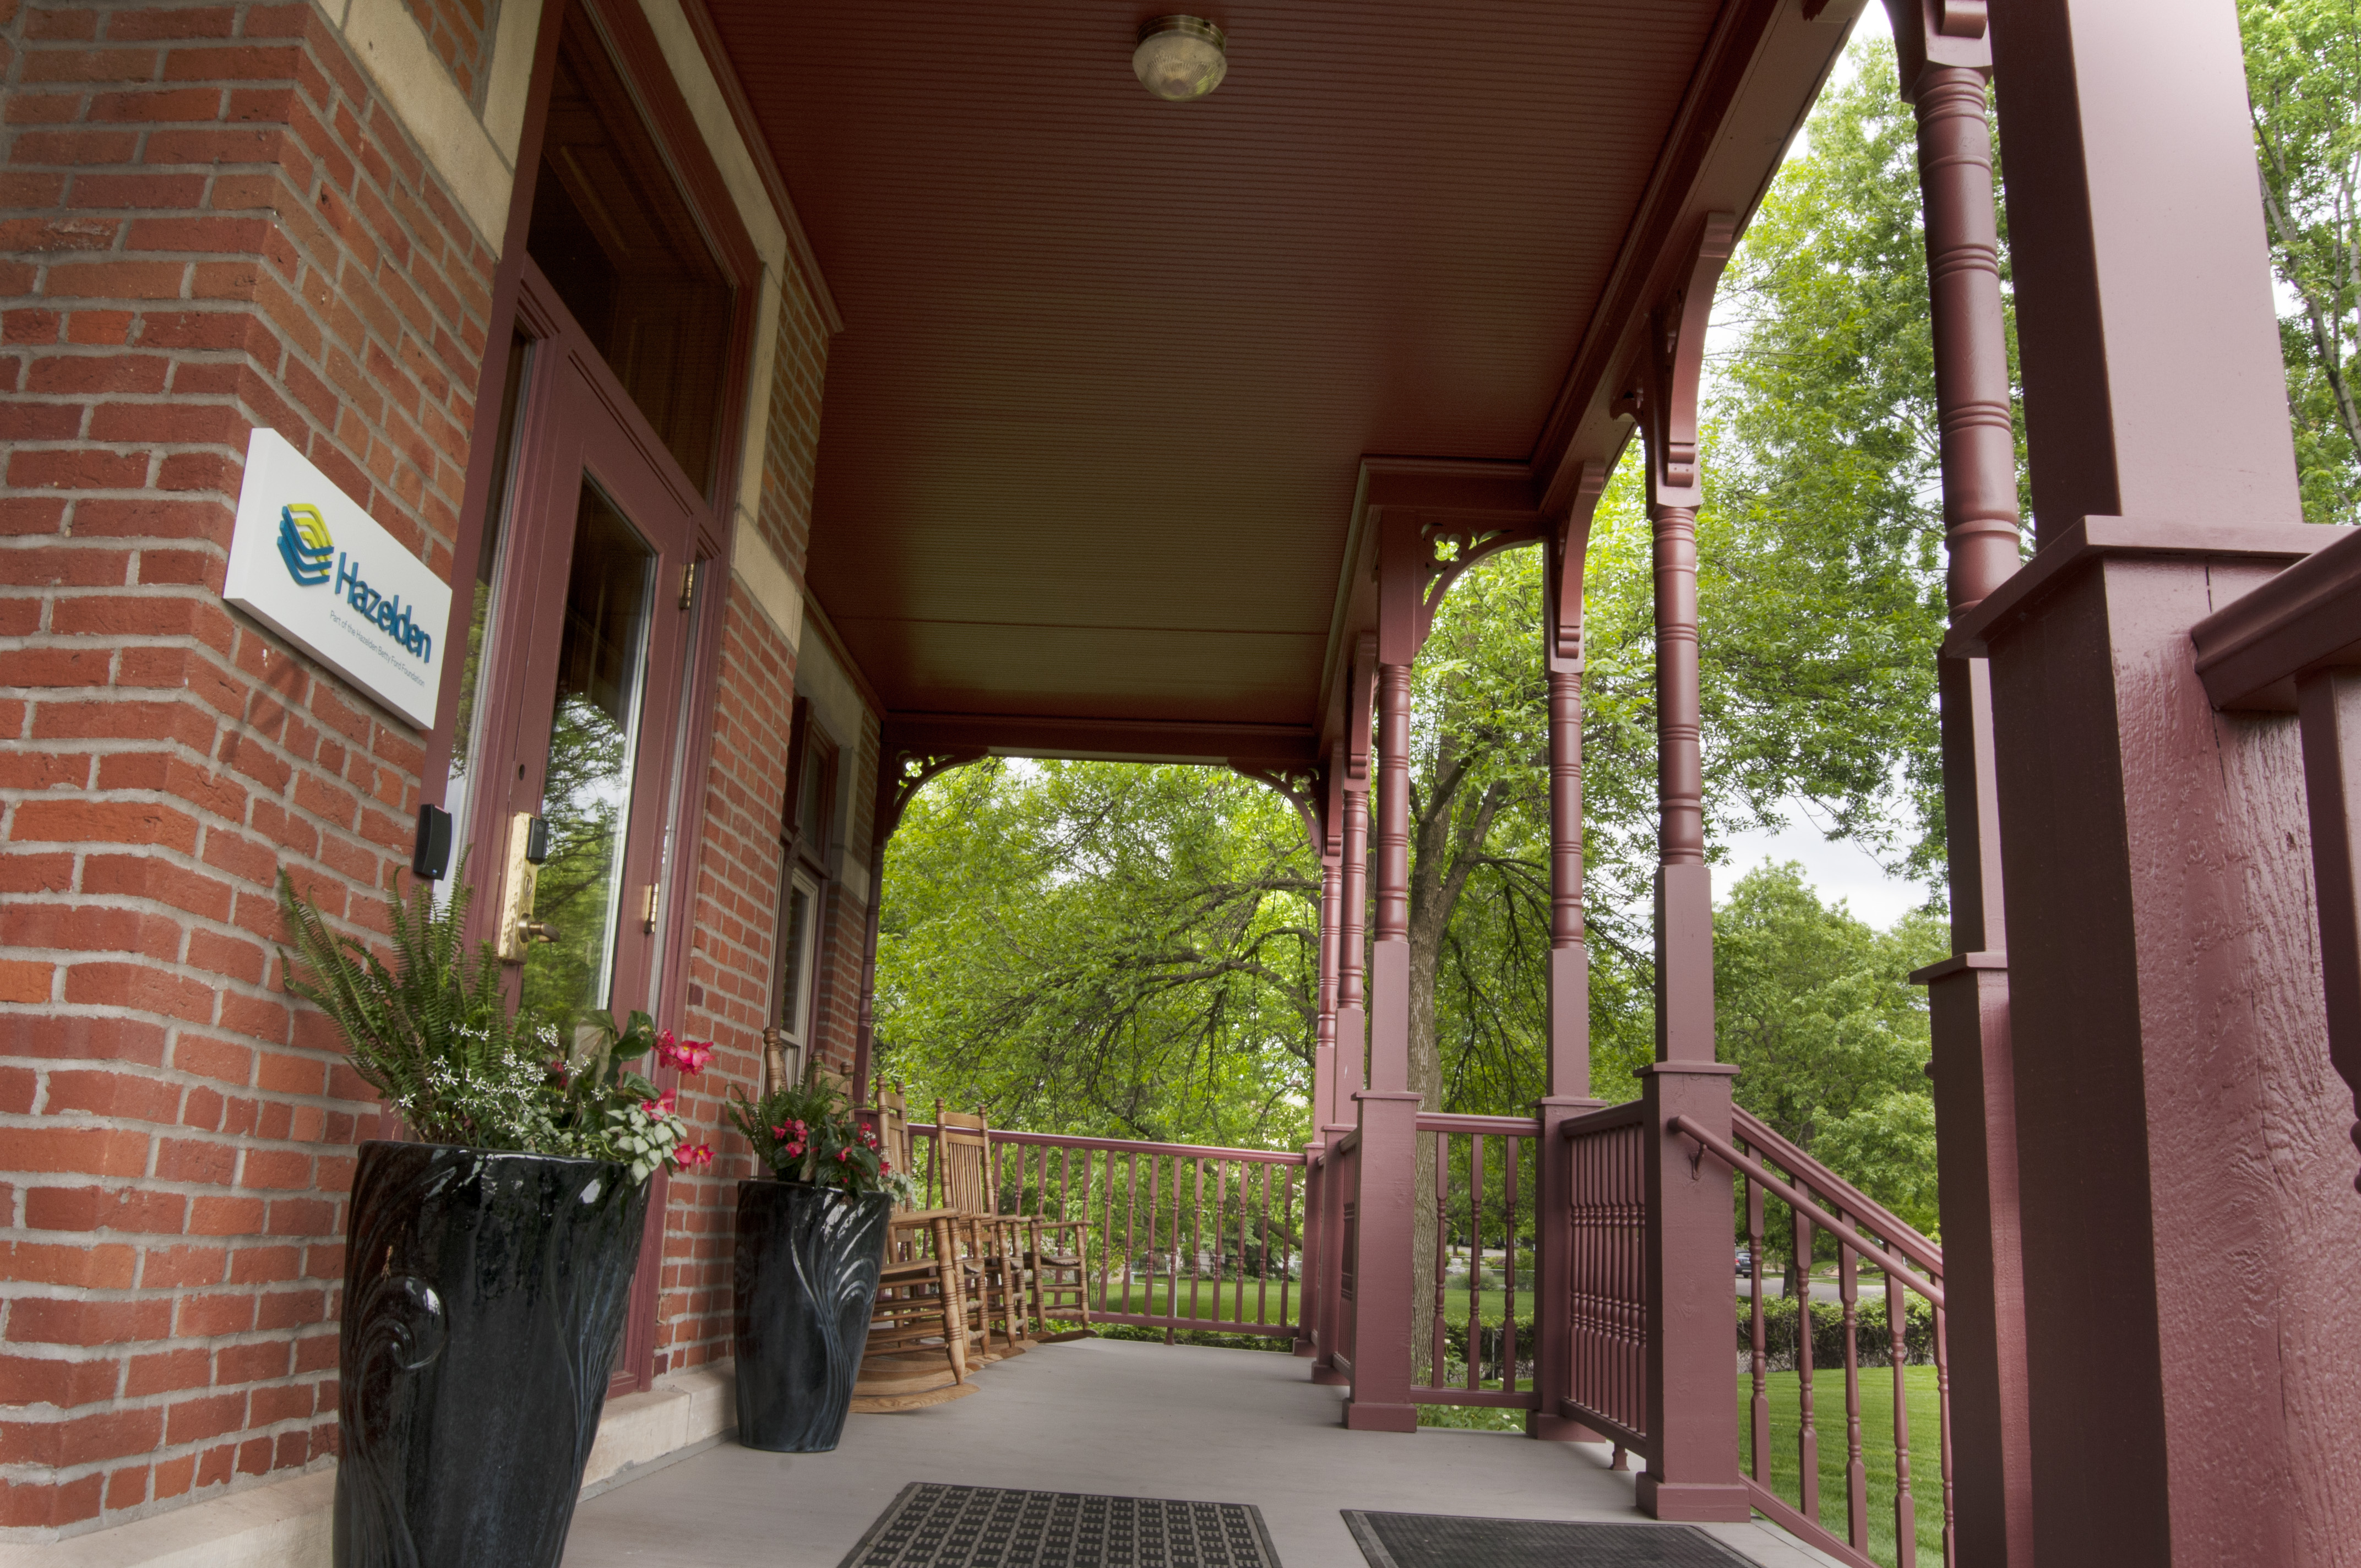 St. Paul porch with rocking chairs and planters